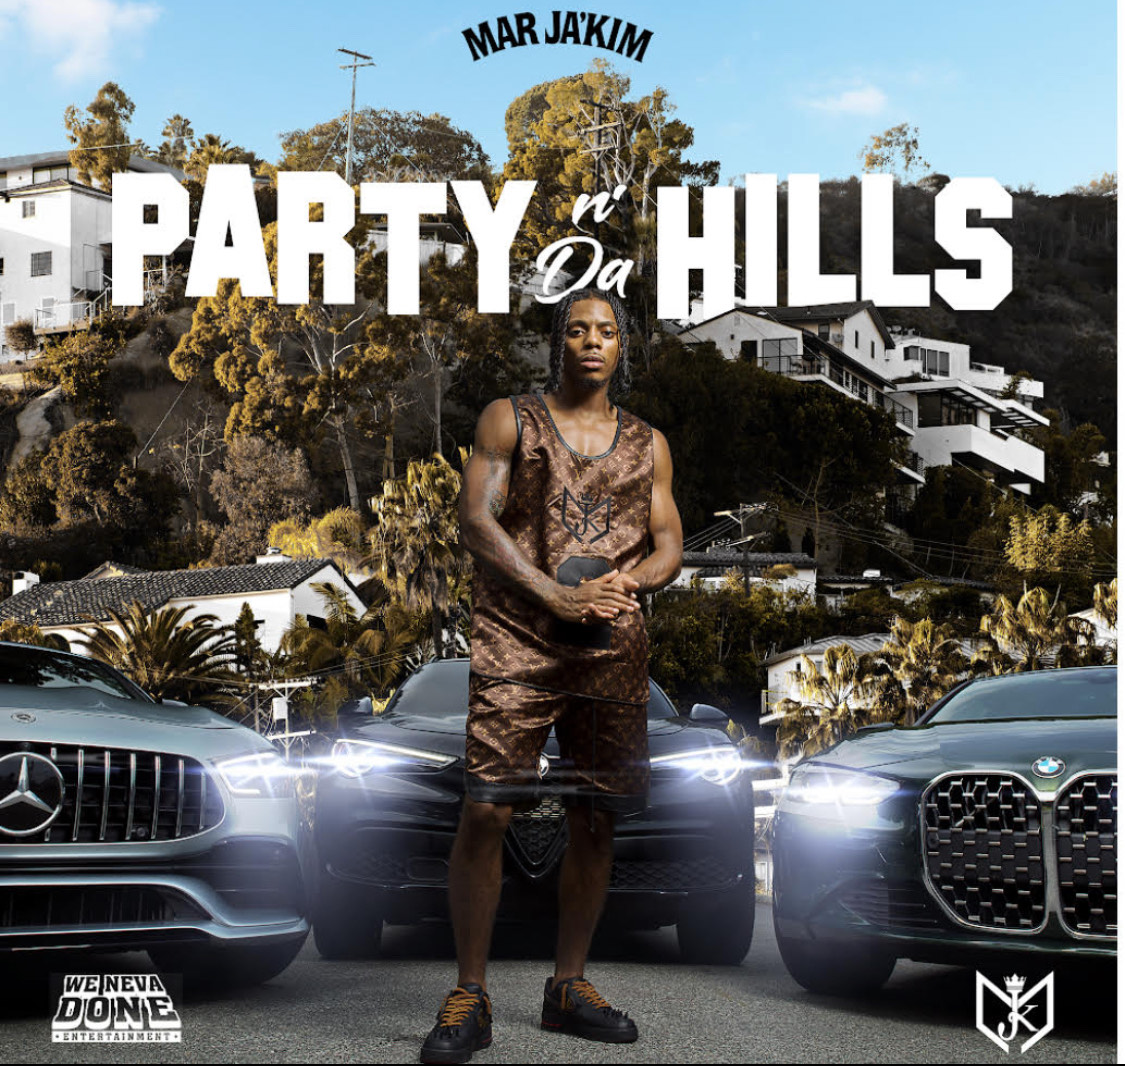 MARJA’KIM: Superstar in the Making Garners 150K Views on YouTube for "Party N’Da Hills"